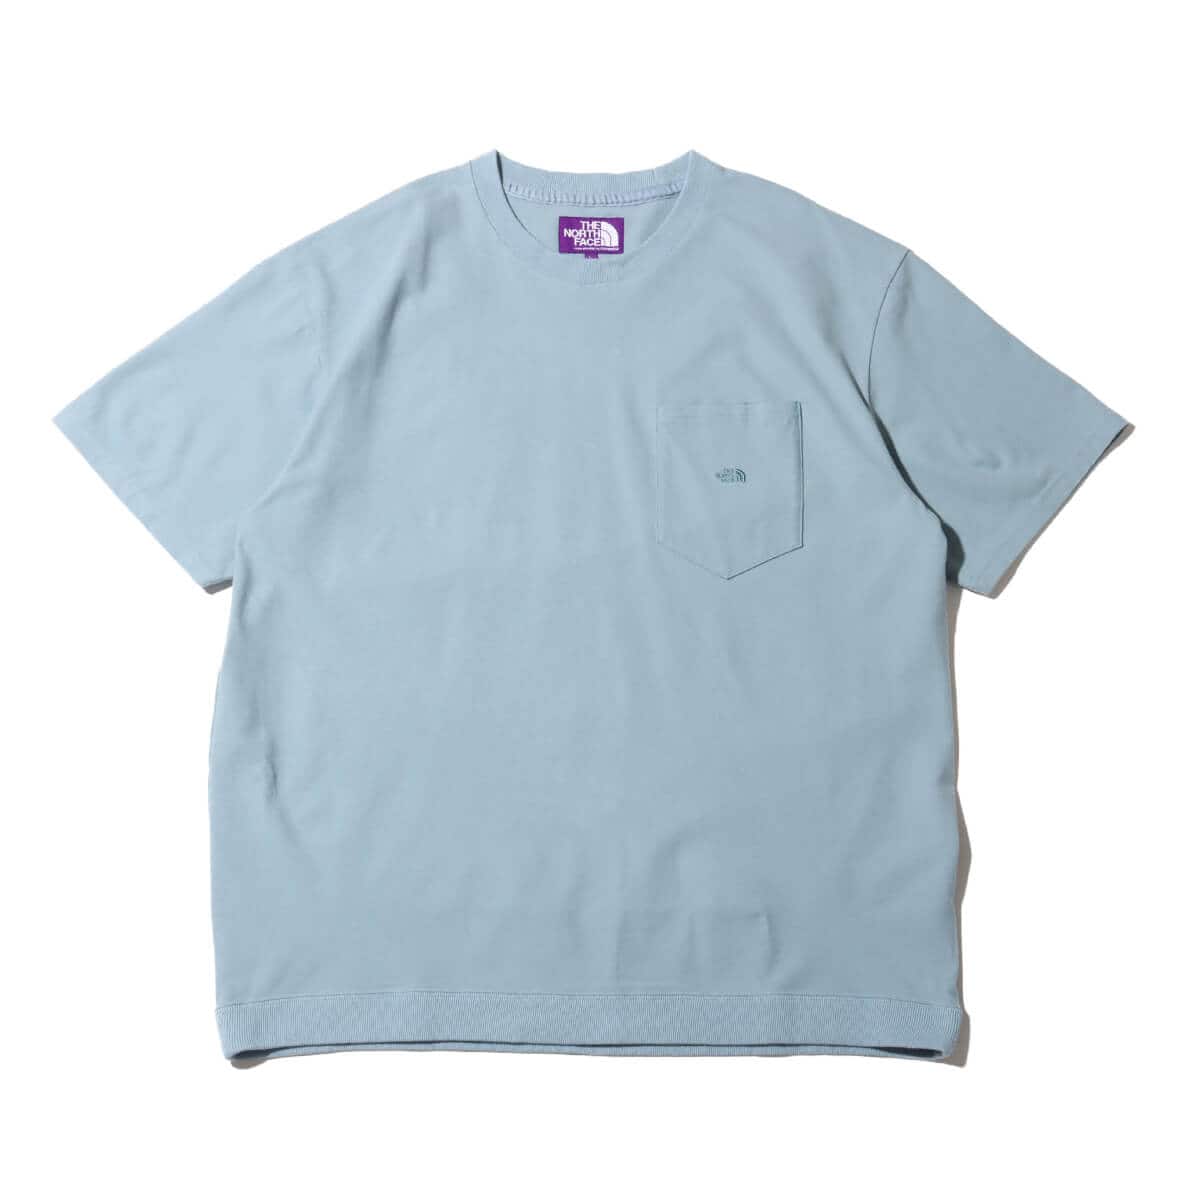 THE NORTH FACE PURPLE LABEL High Bulky Pocket Tee Sax